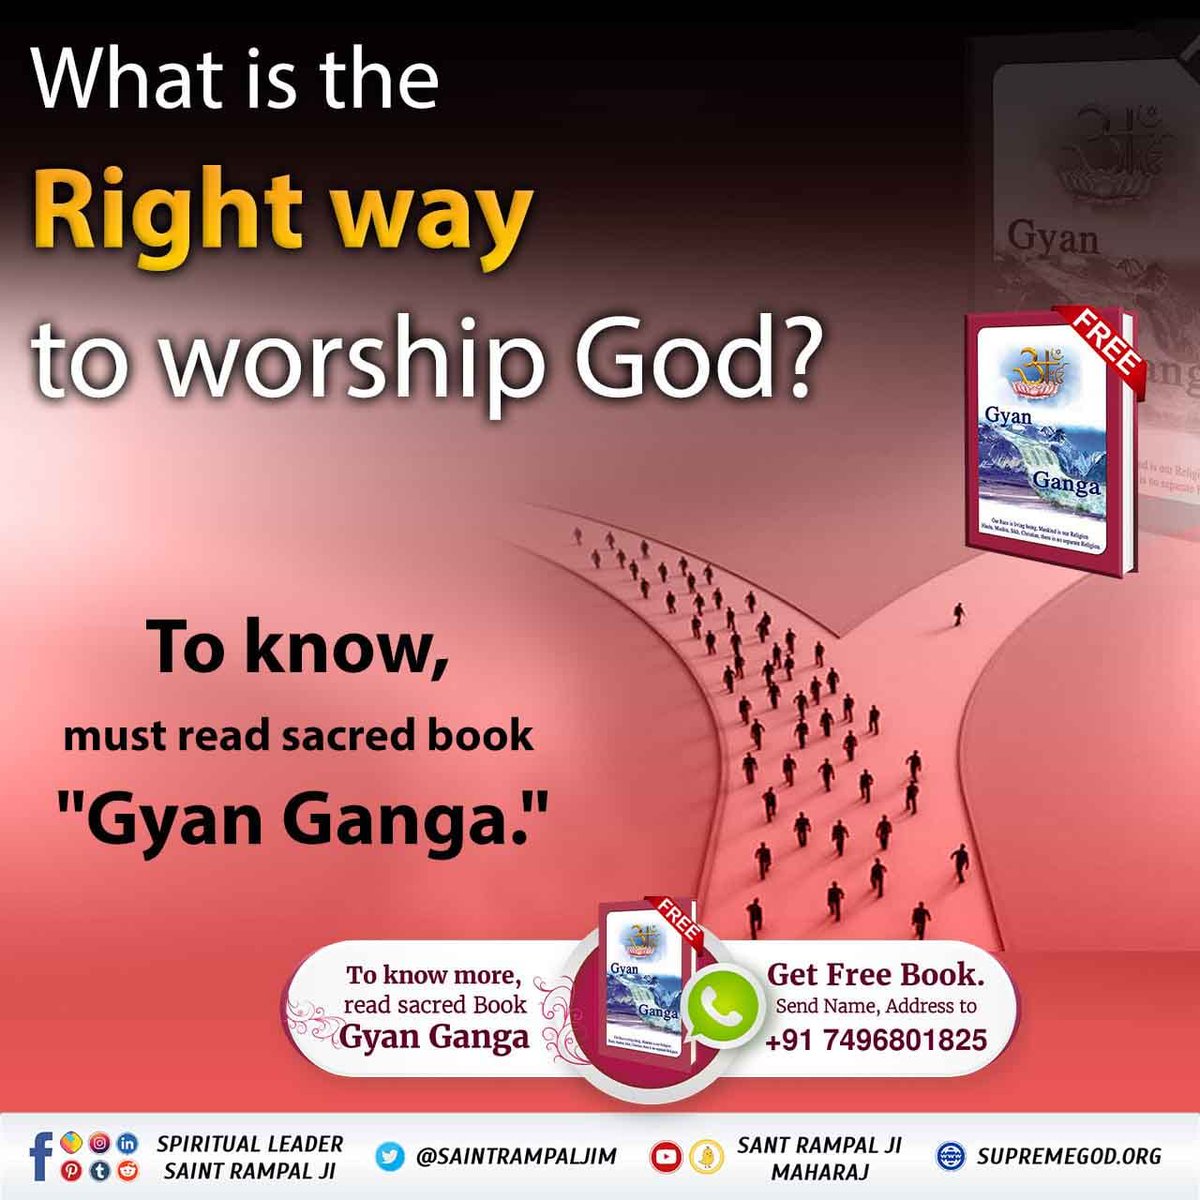 #GodMorningTuesday
What is the Right way to worship God?
📚To receive free Initiation and spiritual books by Sant Rampal Ji Maharaj Ji, message us on Whatsapp: +917496801823